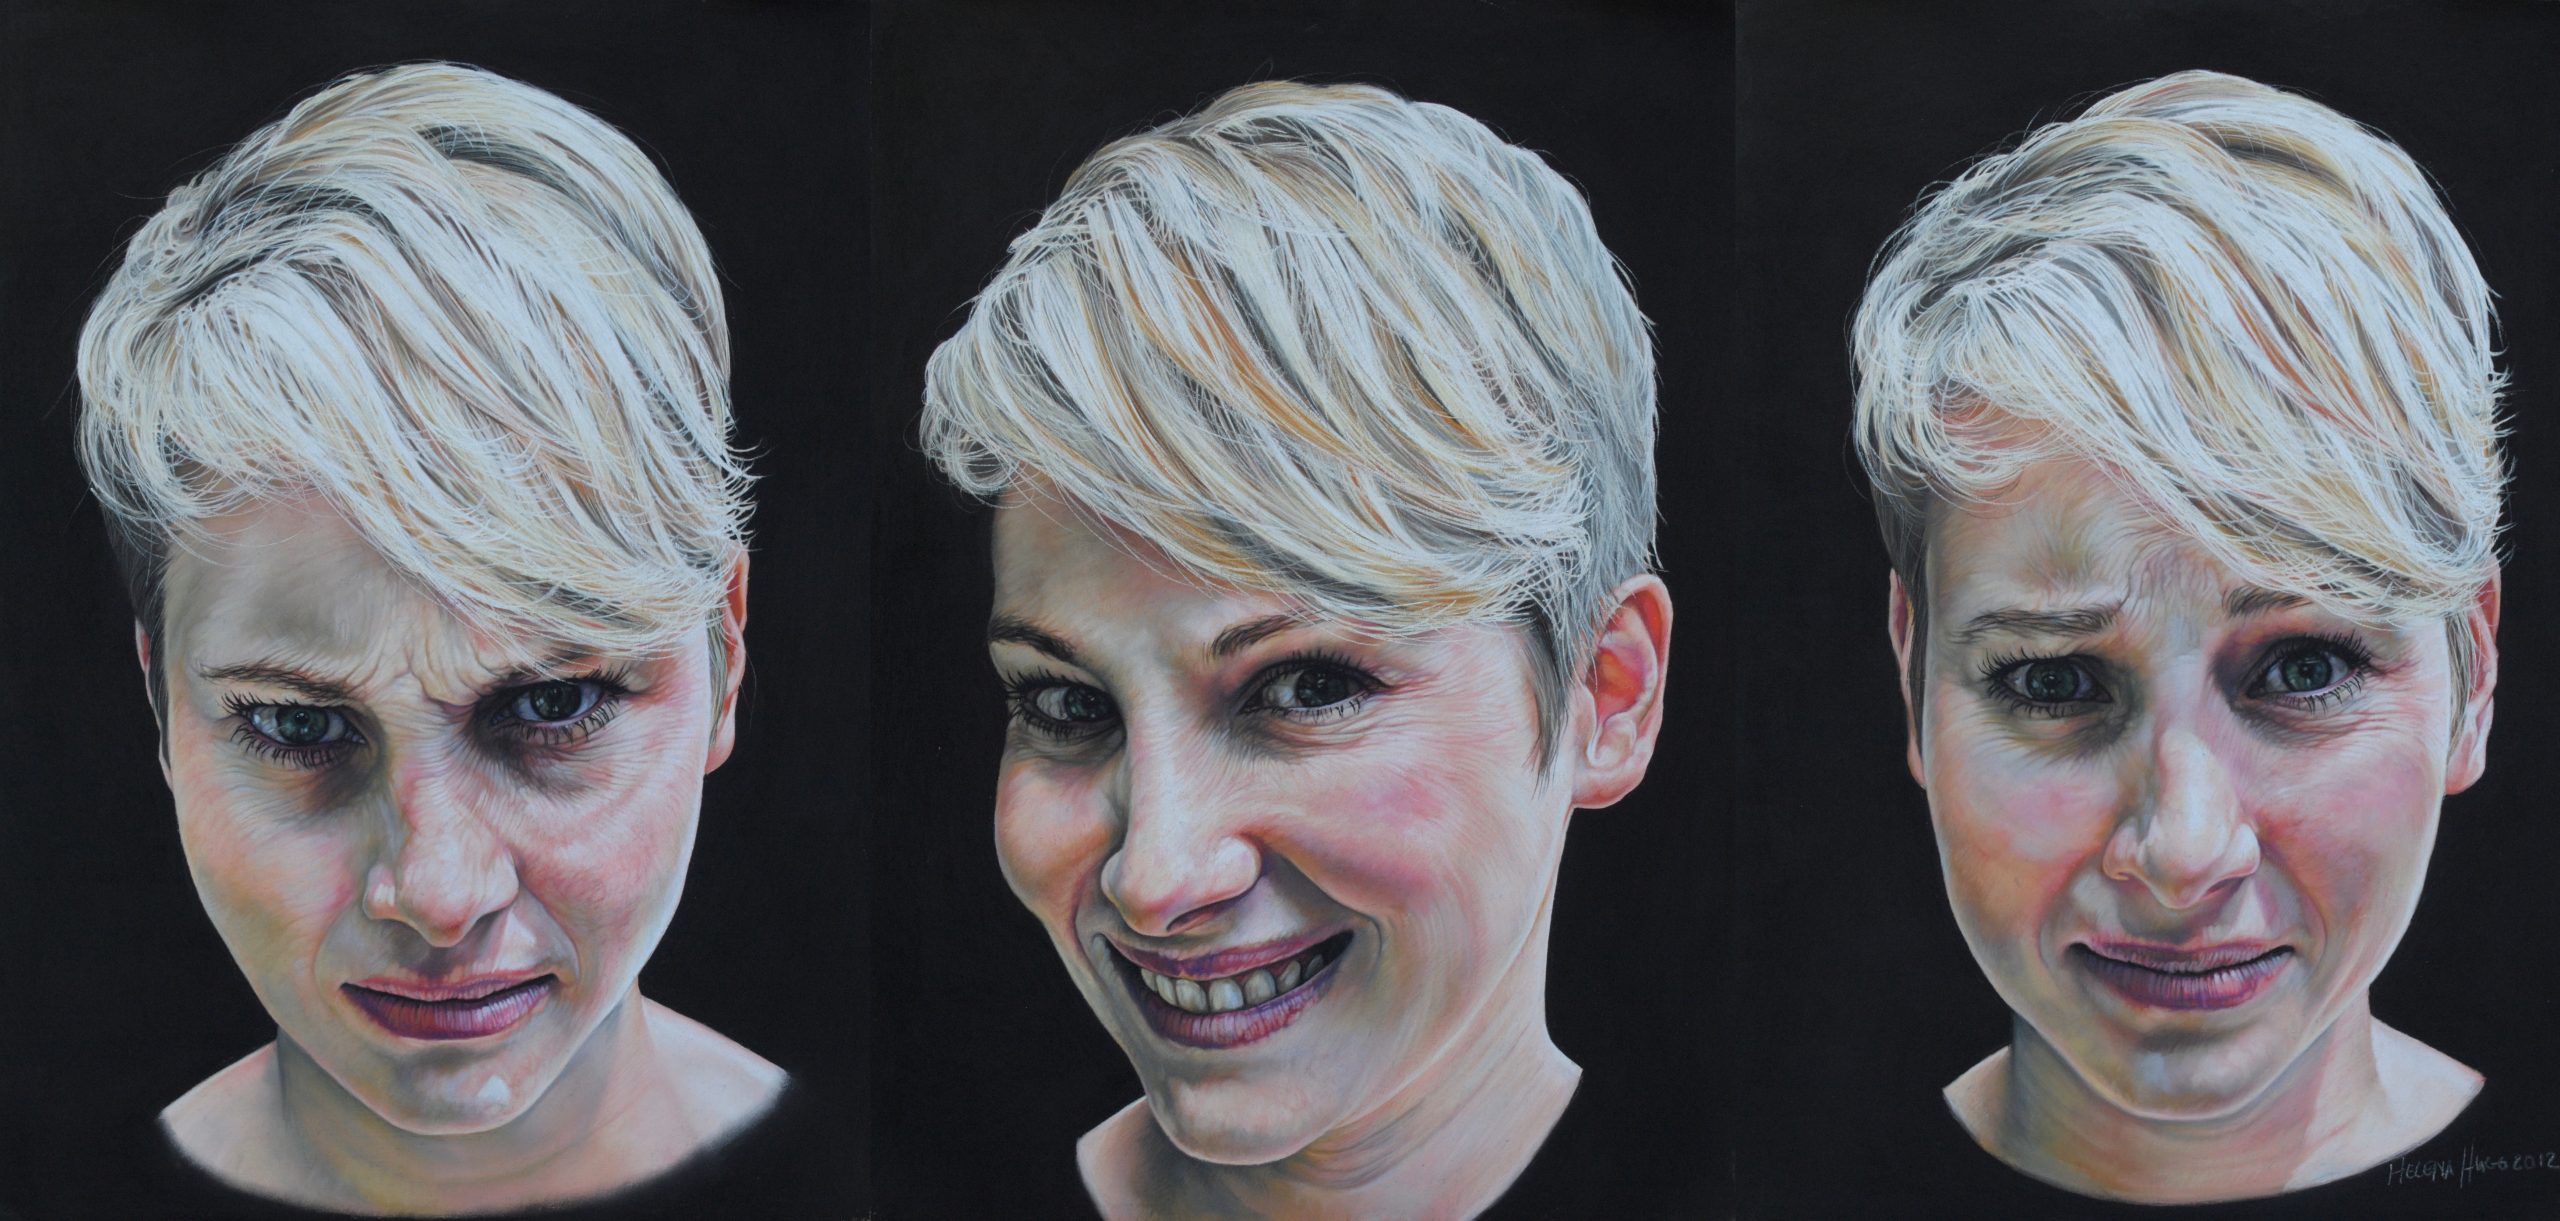 The Osseous Type: Pays Her Bills
35cm x 84cm
Pastel on board